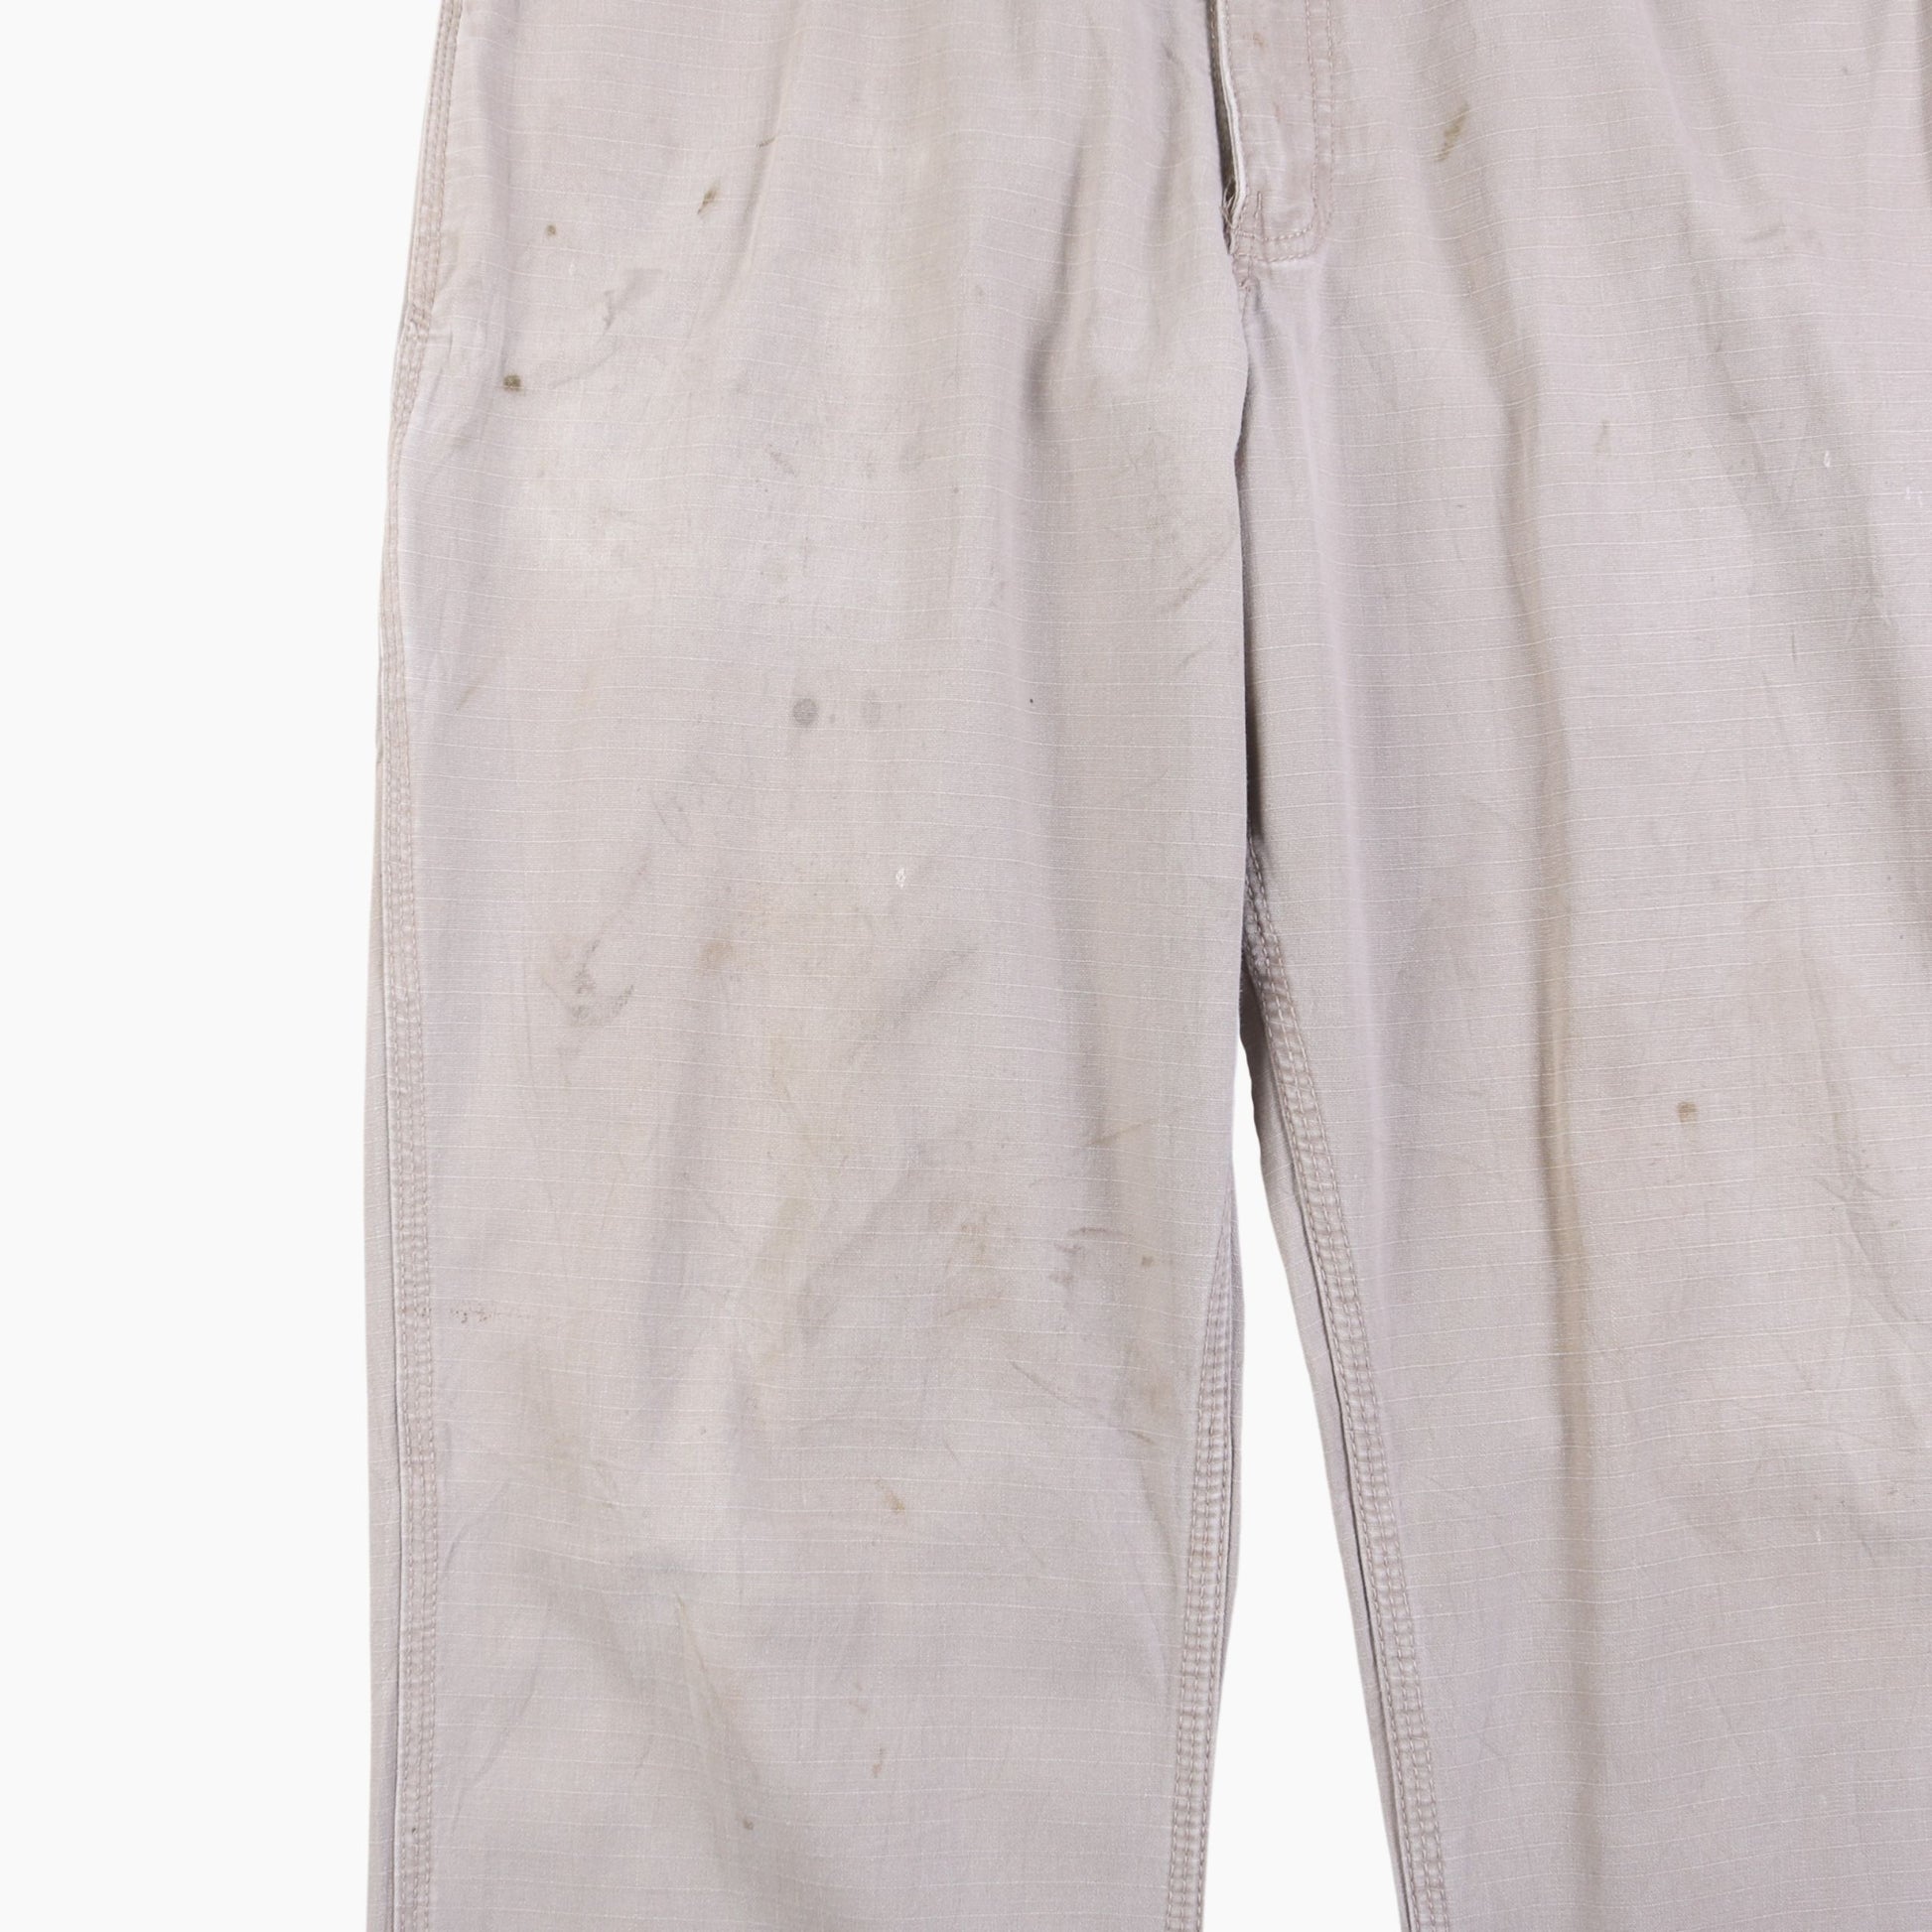 Vintage Carpenter Pants - Washed Stone - 34/34 - American Madness